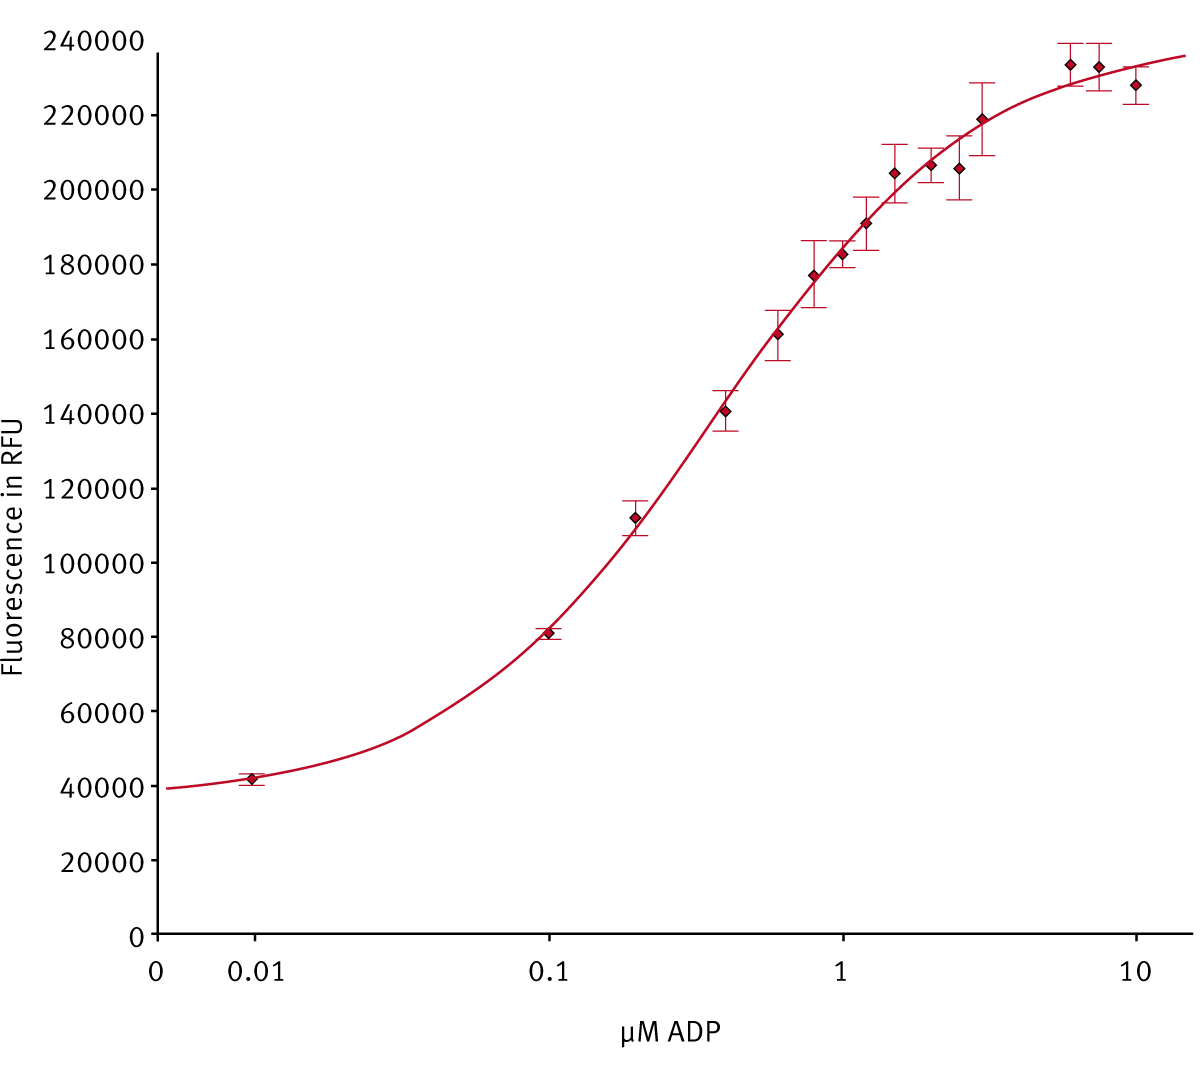 Fig. 3: 10 μM ADP standard curve measured in 5 replicates using a POLARstar Omega in 384 well format (20 μL). The concentration of 0 μM ADP was set to 0.01 μM to allow logarithmic scaling.